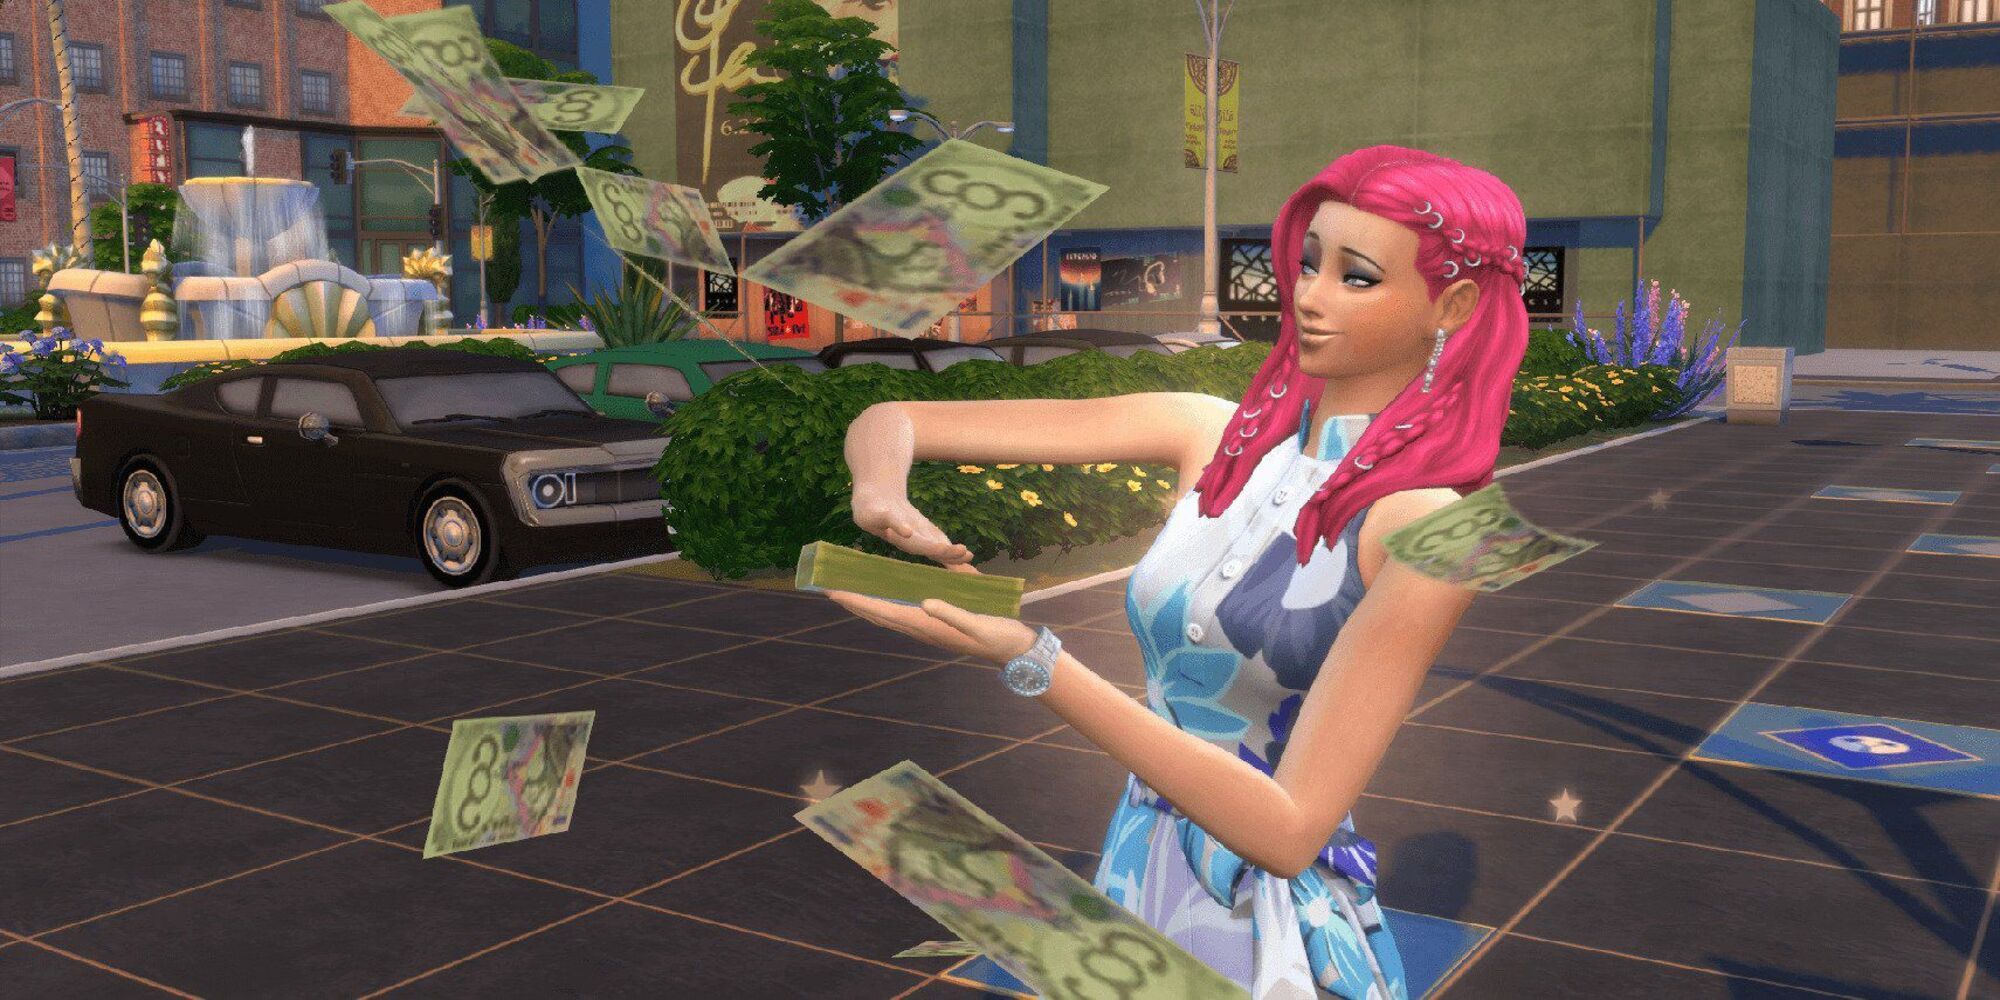 The Sims 4: How to Get Free Money